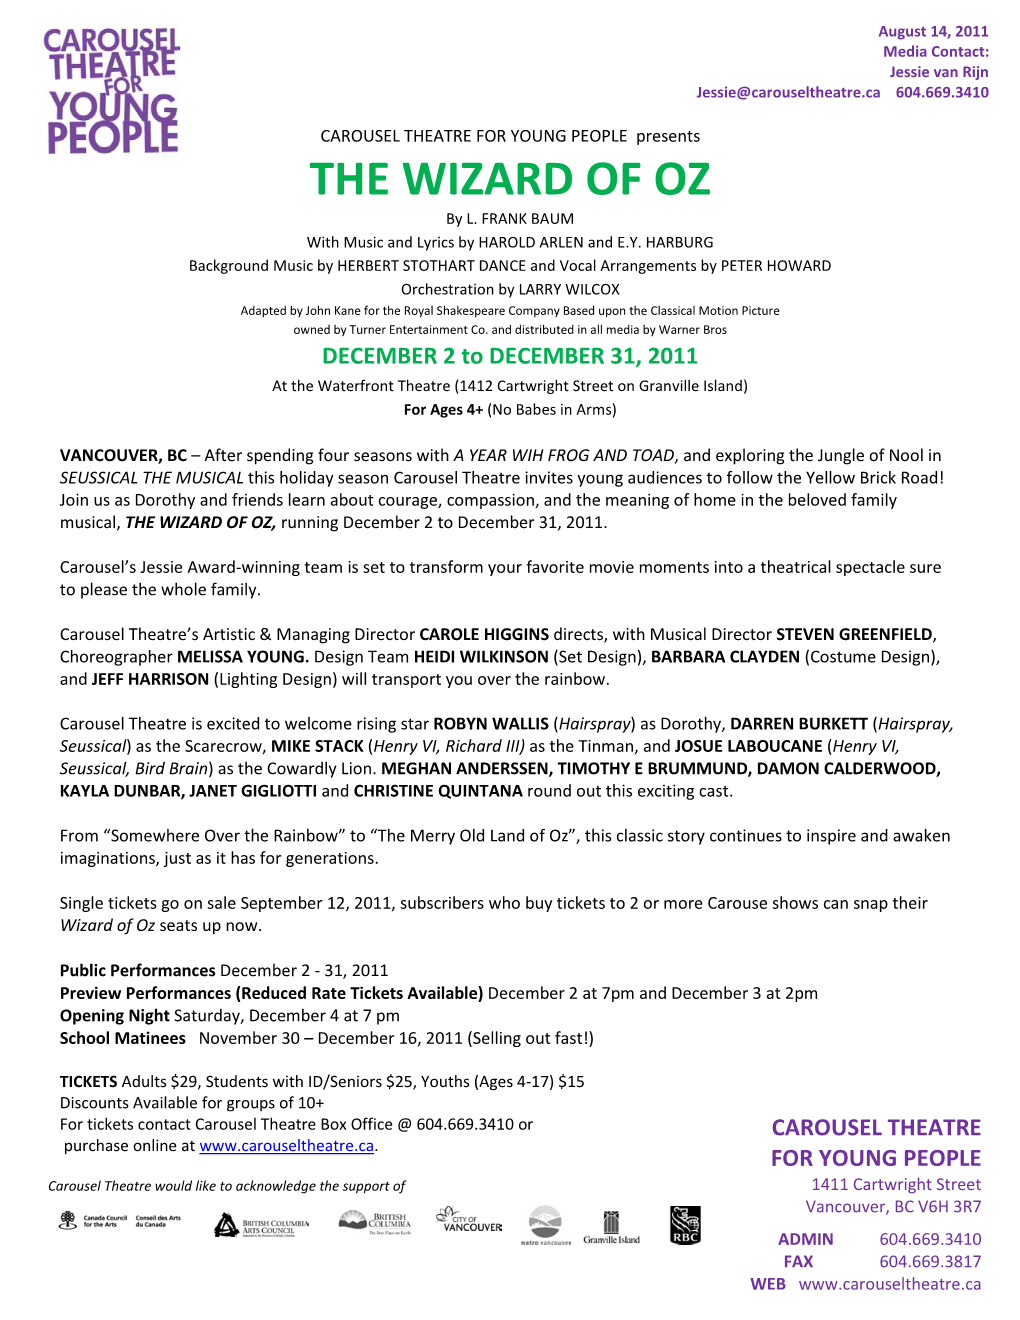 THE WIZARD of OZ by L